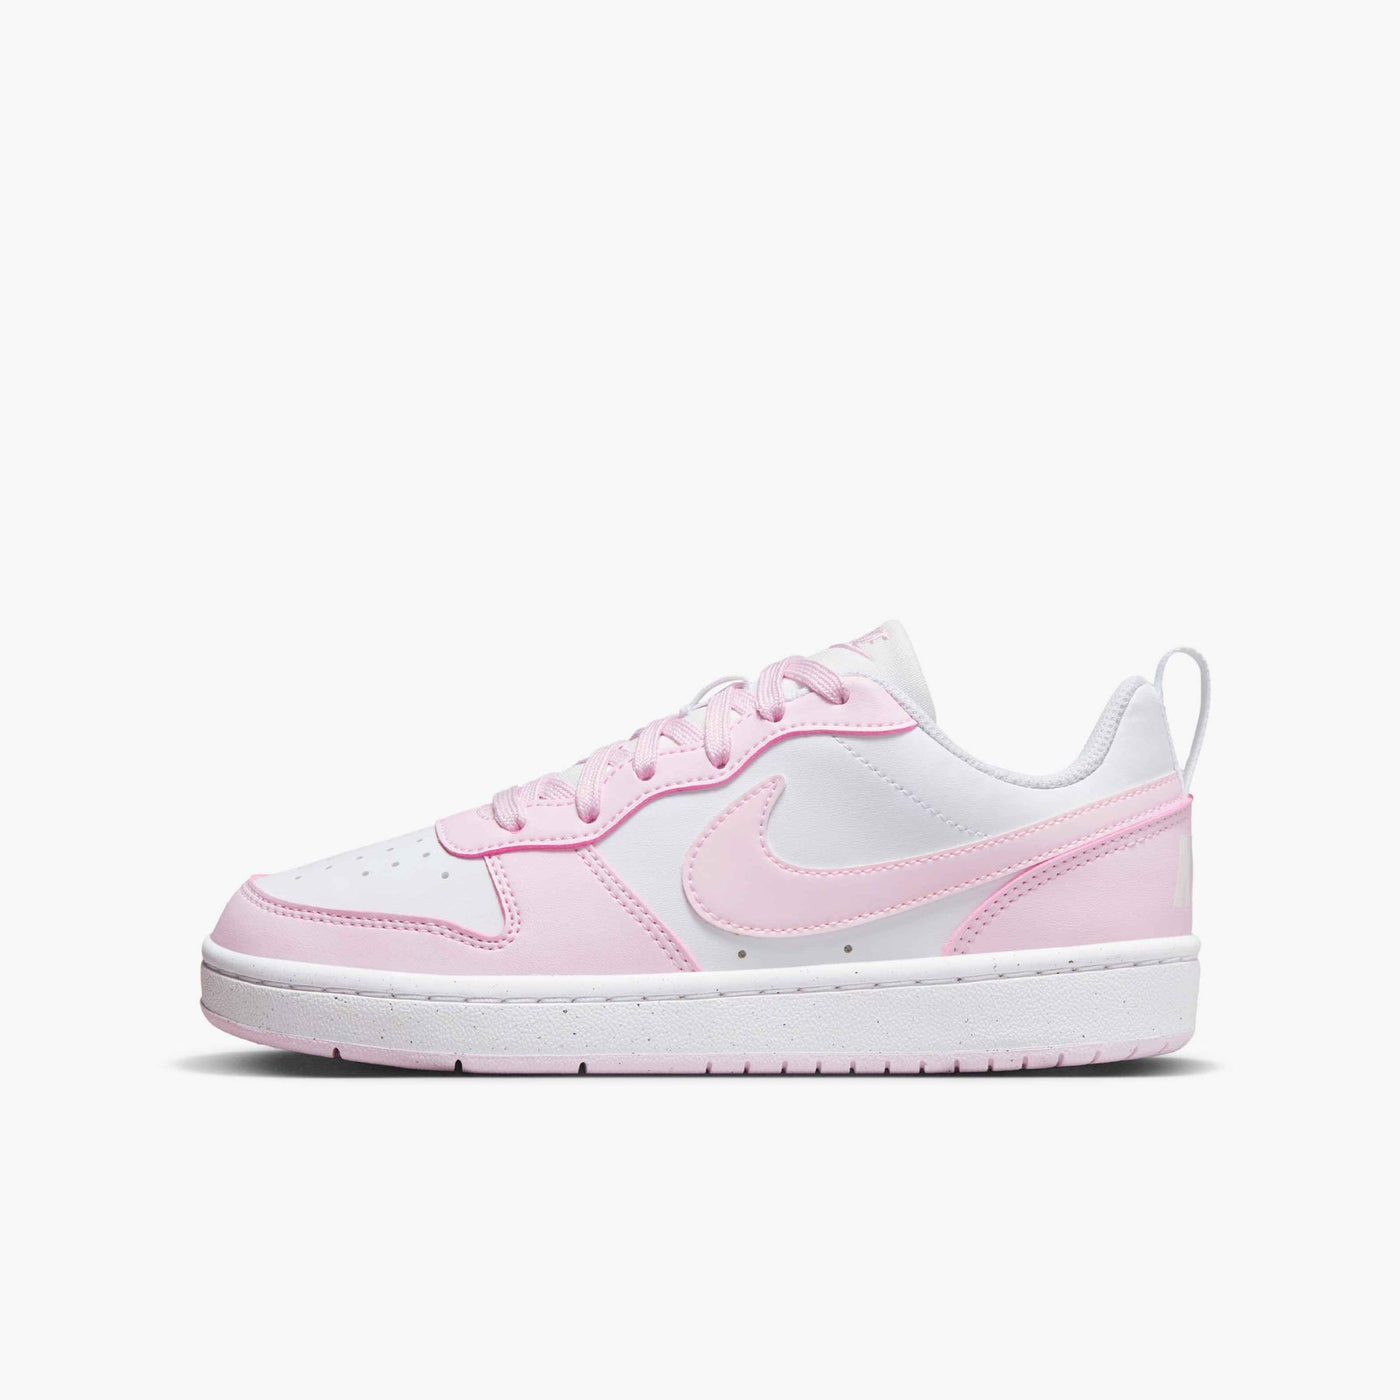 SNEAKERS NIKE COURT BOROUGH LOW RECRAFT (GS) DONNA